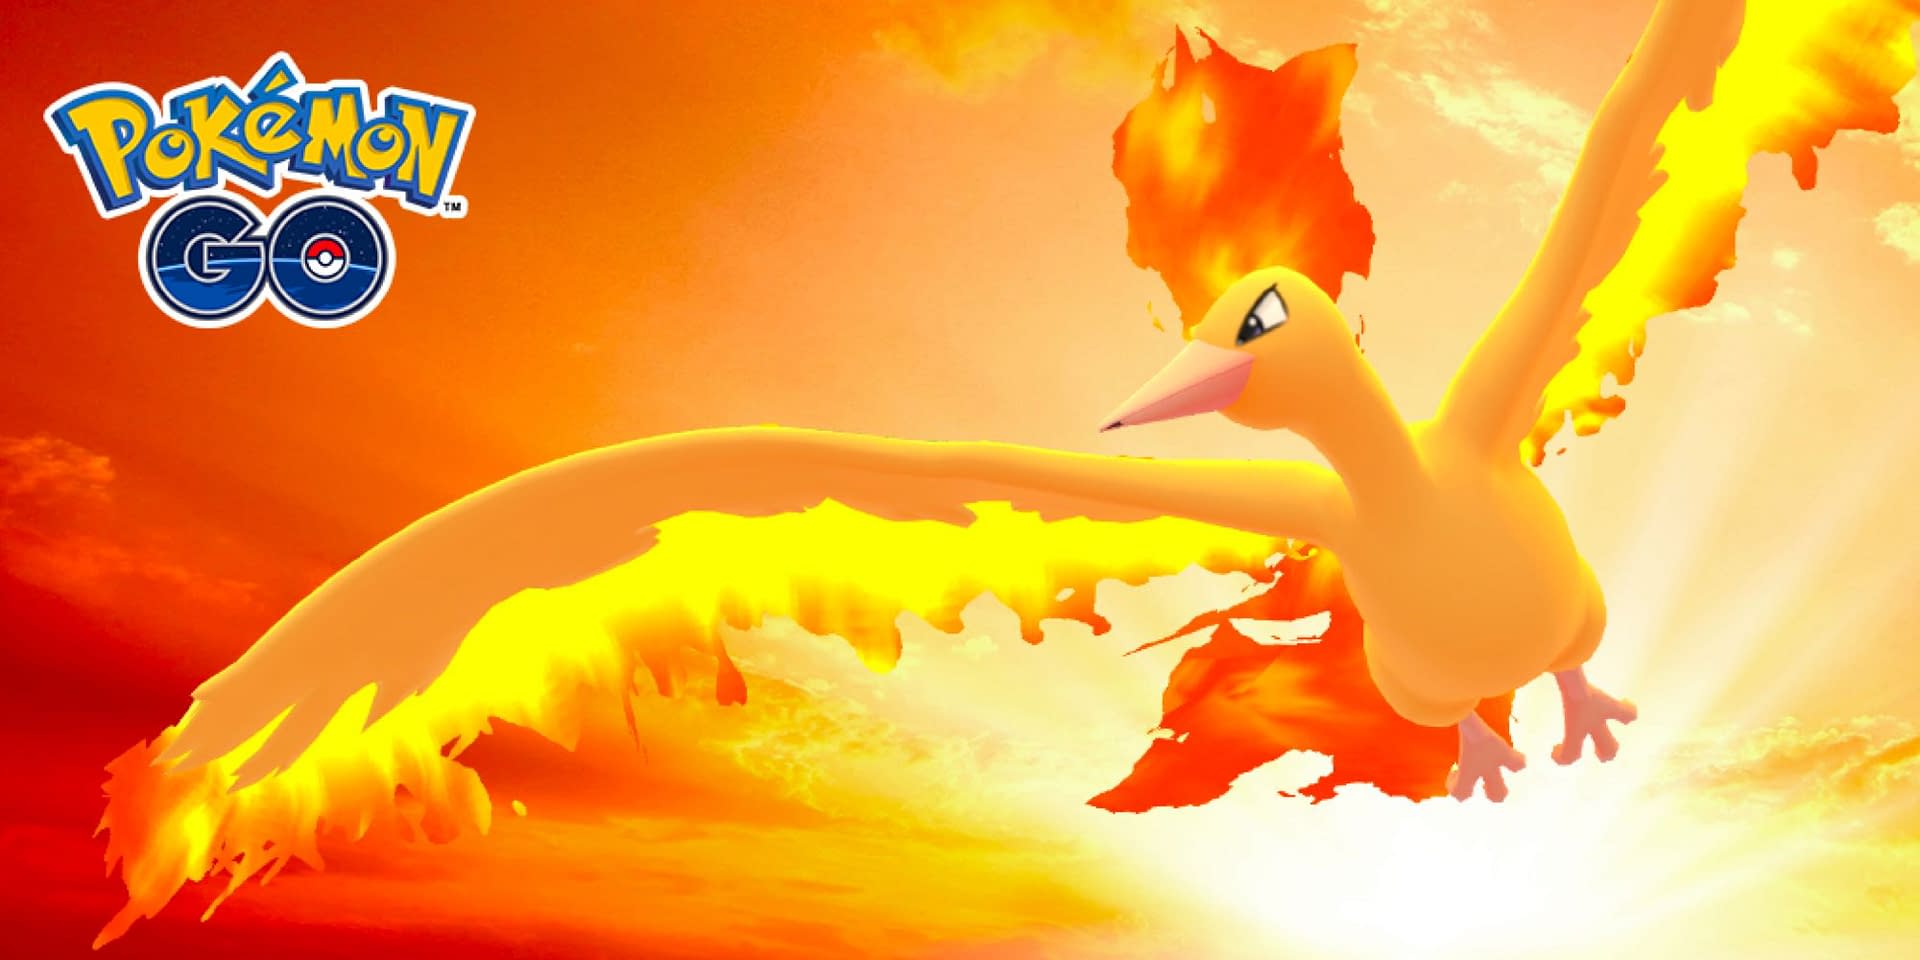 Pokemon GO Boosted Shiny Moltres! Registered or 30+ Days Ultra Friends